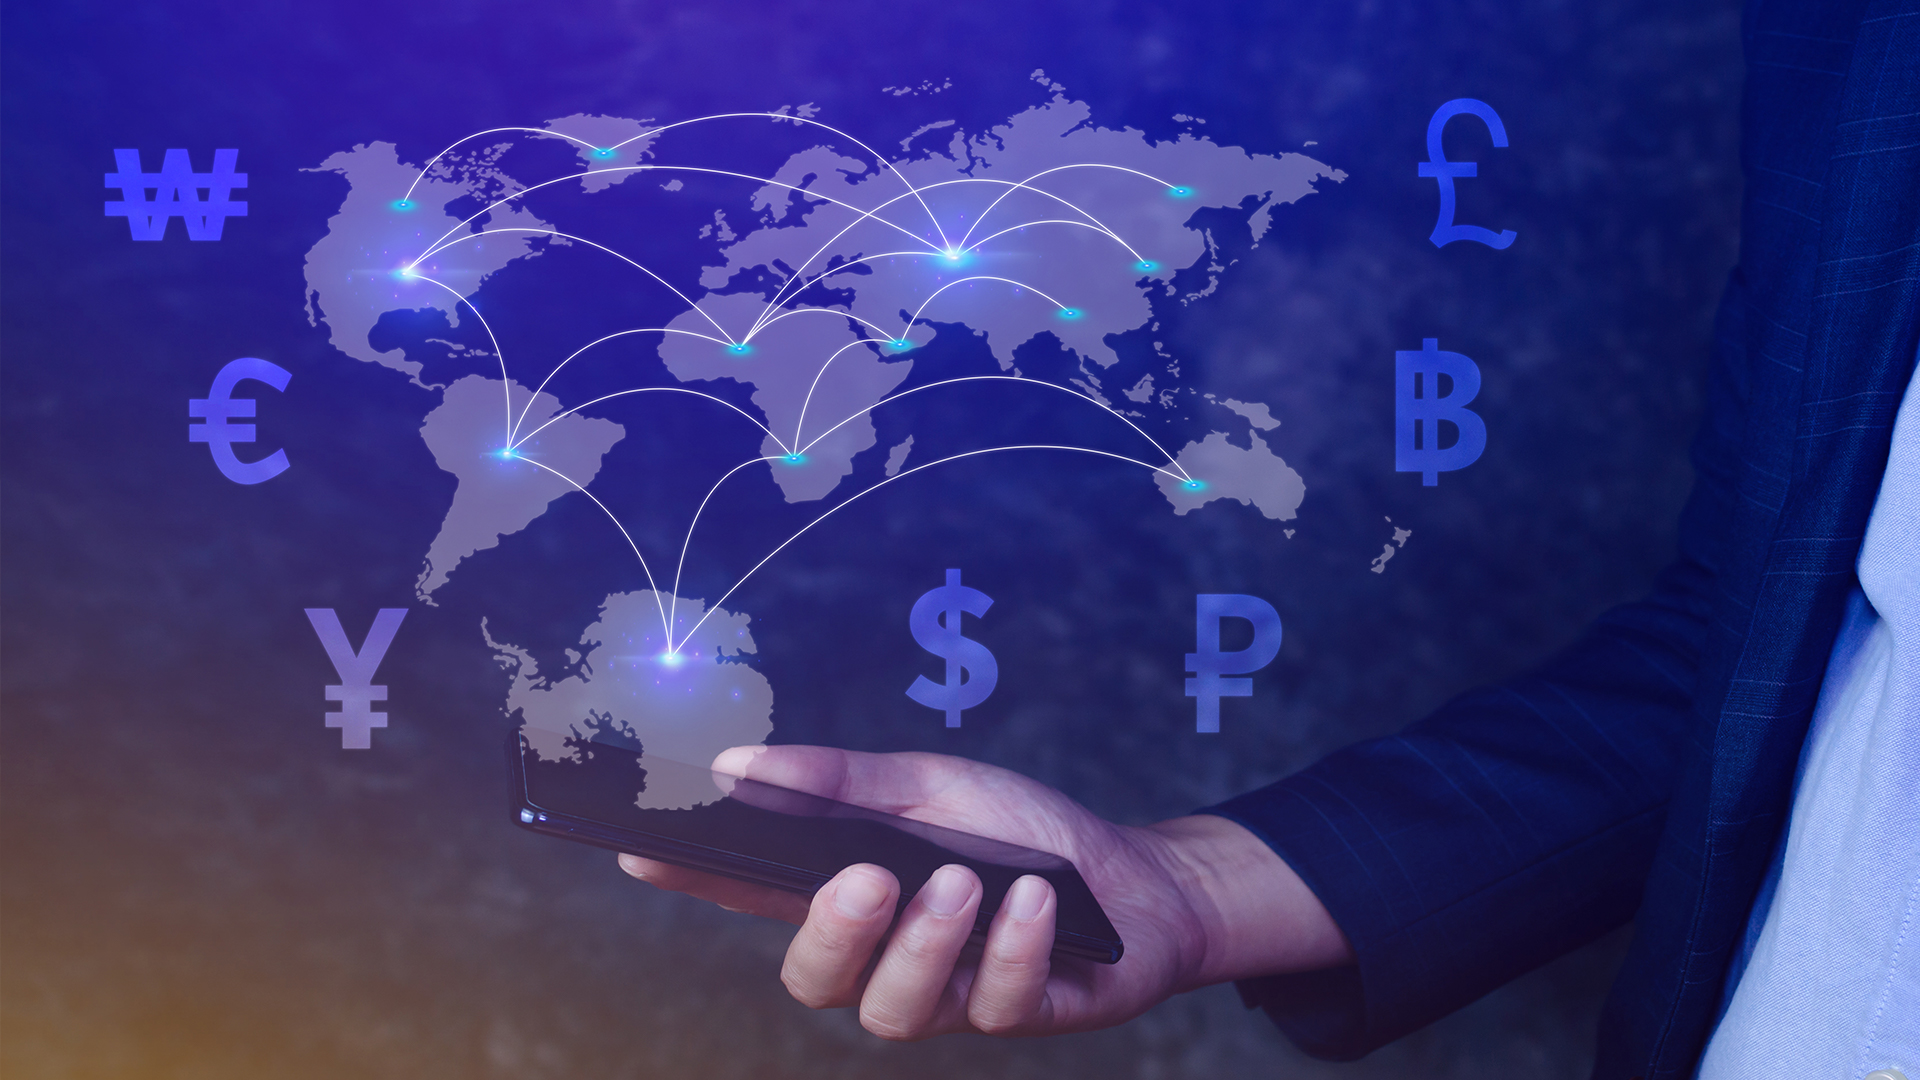 businessman-using-mobile-phone-laptop-computer-money-transfers-currency-exchanges-countries-world-online-banking-interbank-payment-concept